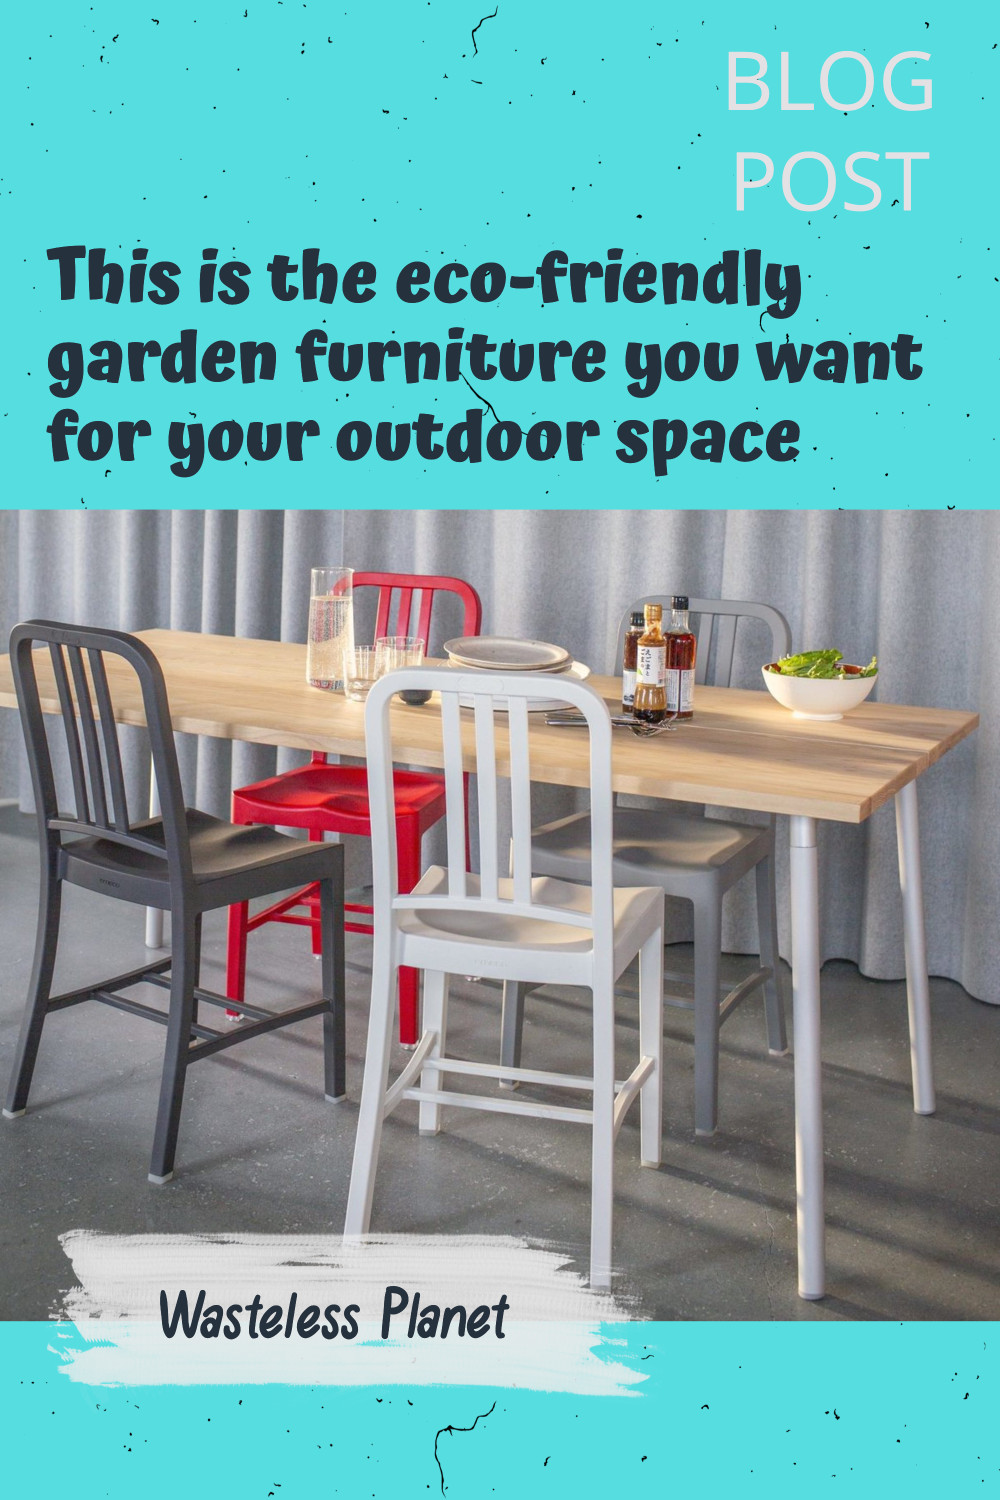 This is the eco-friendly garden furniture you want for your outdoor space